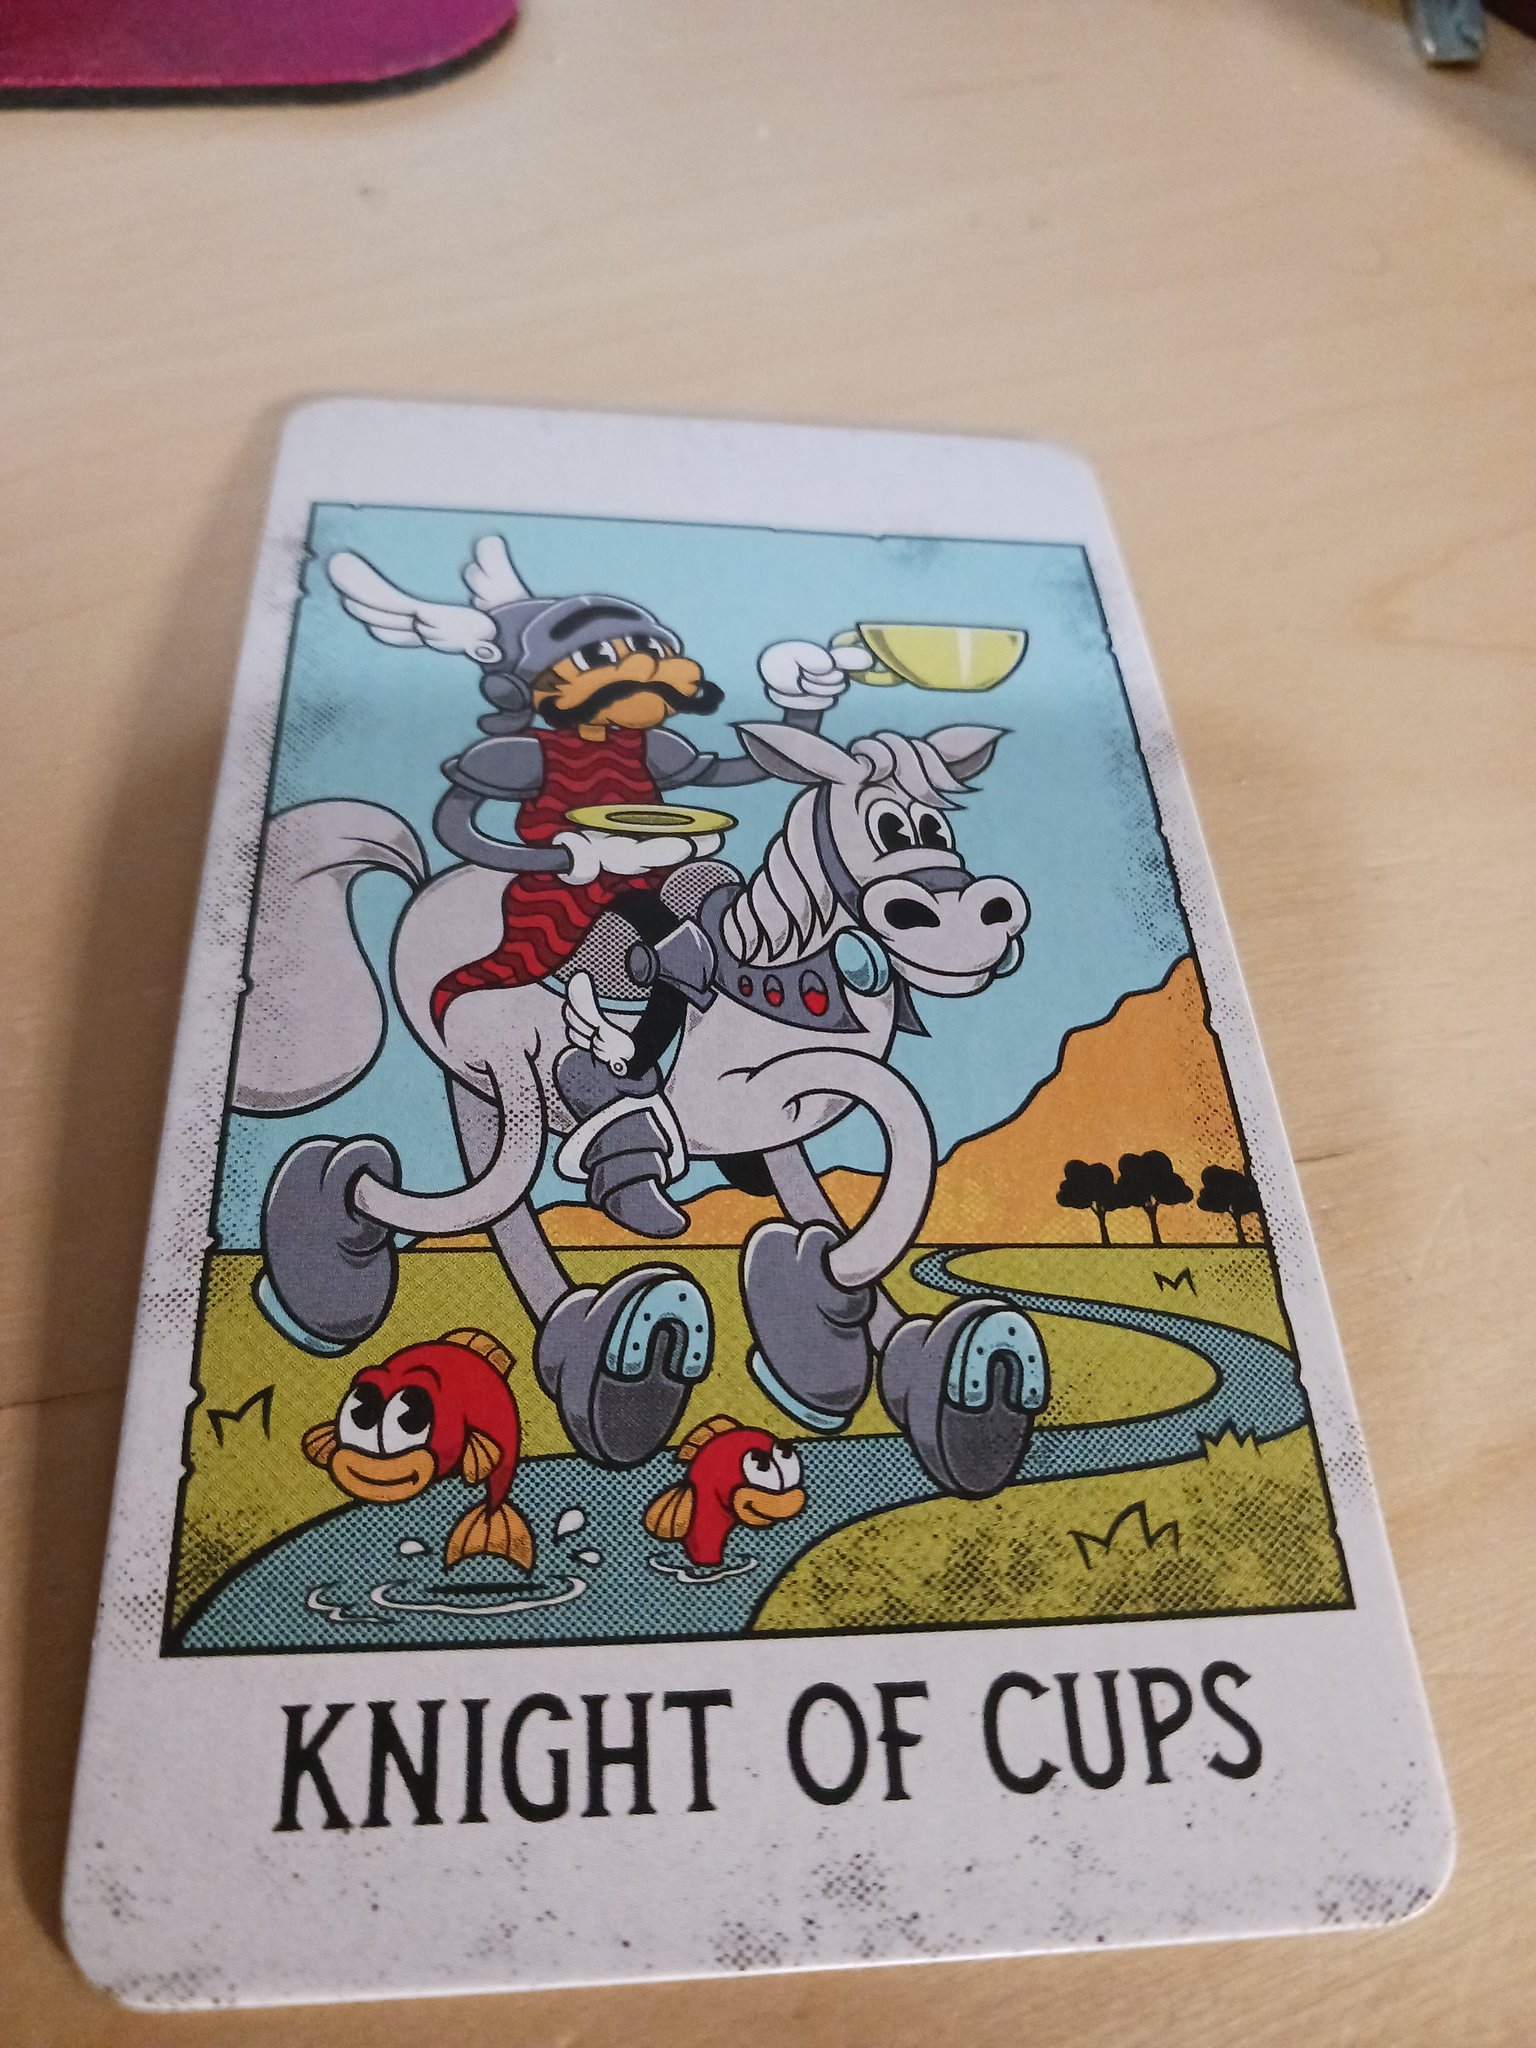 an upright knight of cups from the mystical medleys deck. the image is a knight astride his horse while crossing a stream. he is holding a cup aloft. two cartoon fish are jumping out of the water underneath the steed.